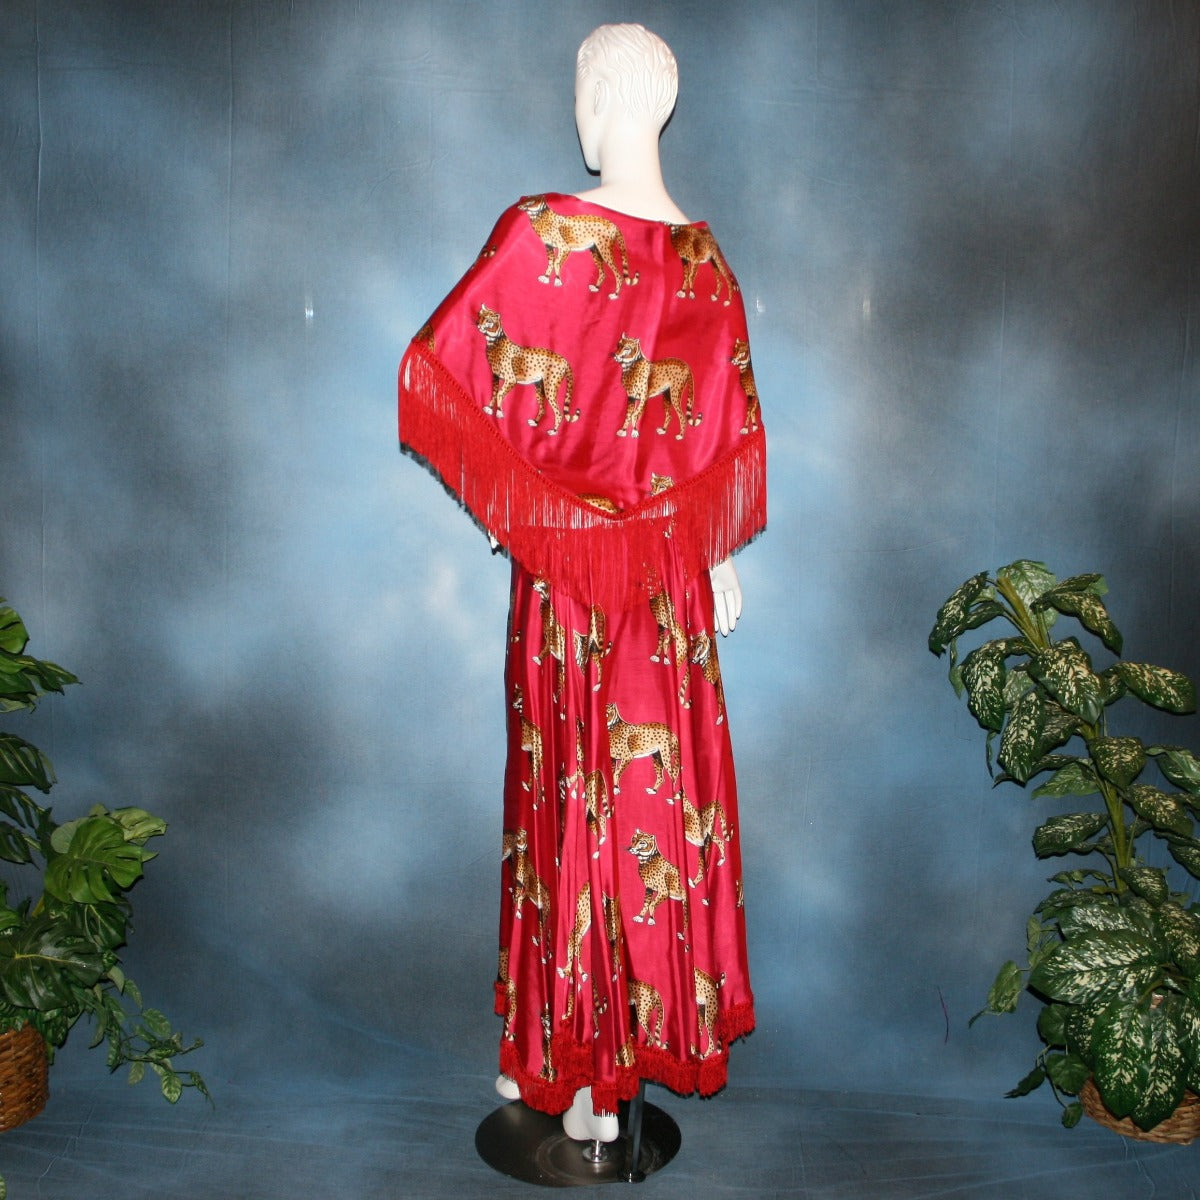 Crystal's Creations back view of red ballroom skirt & shawl created in red satin with cheetah print